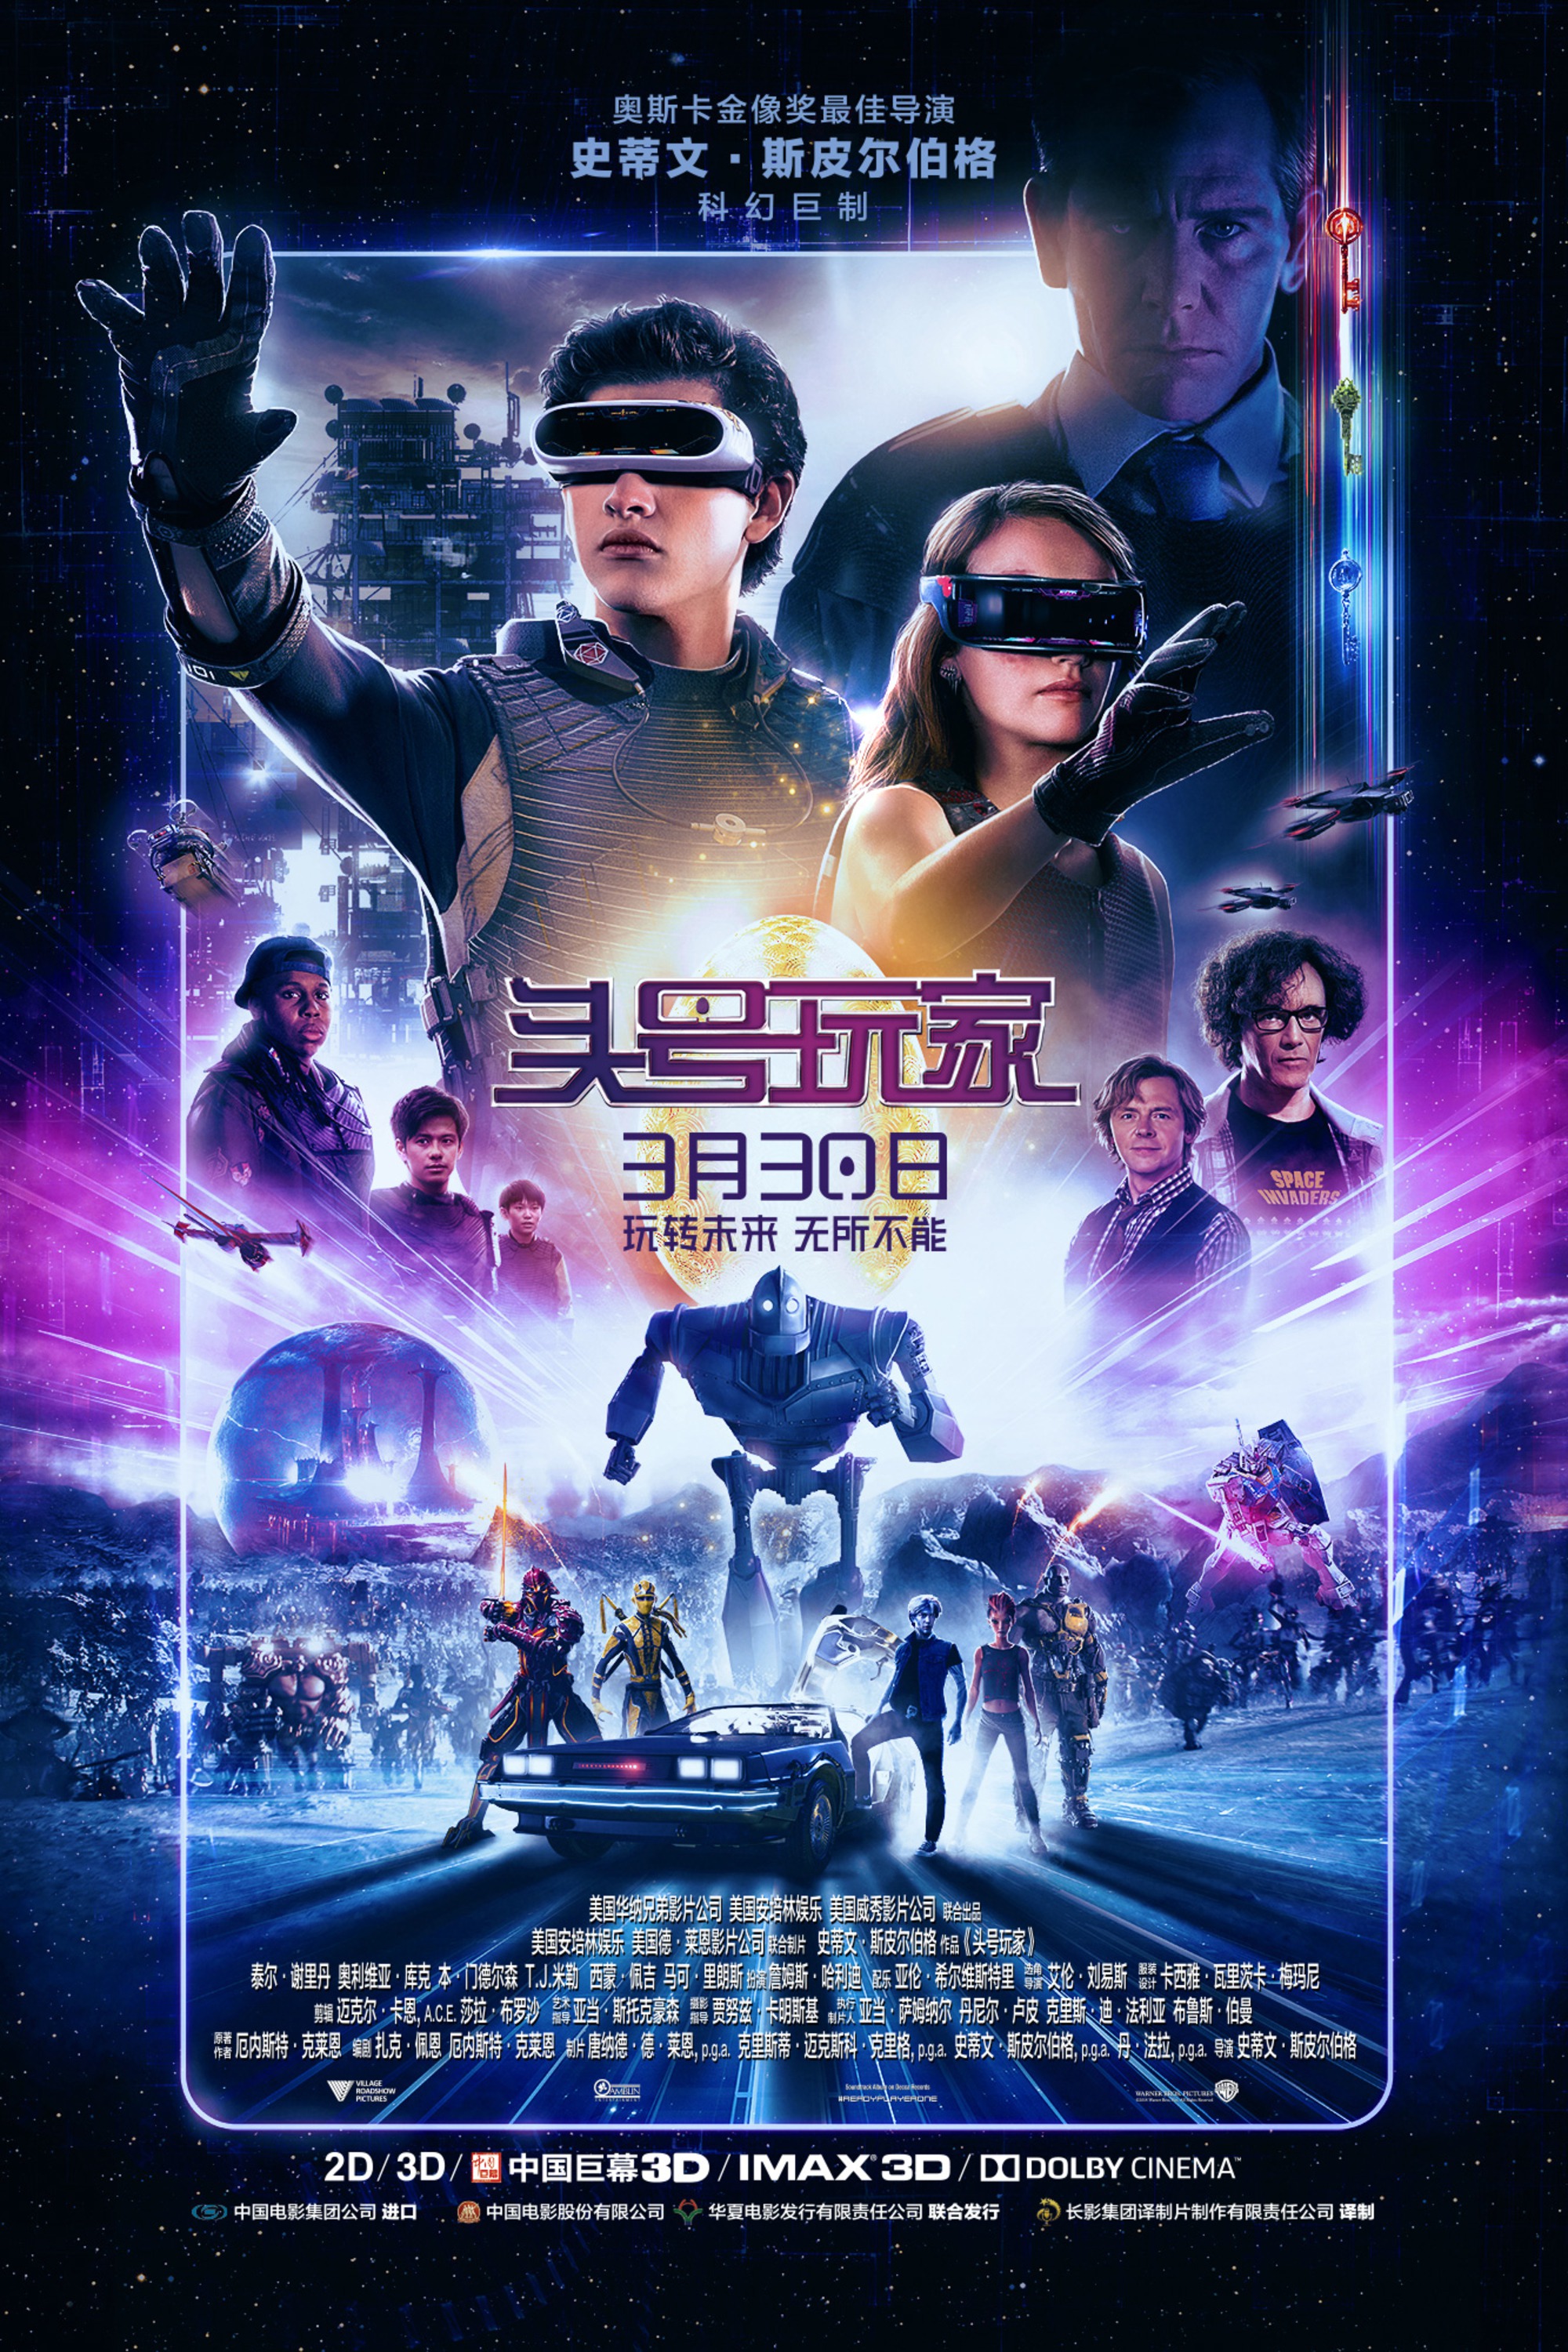 ready player one movie online free download